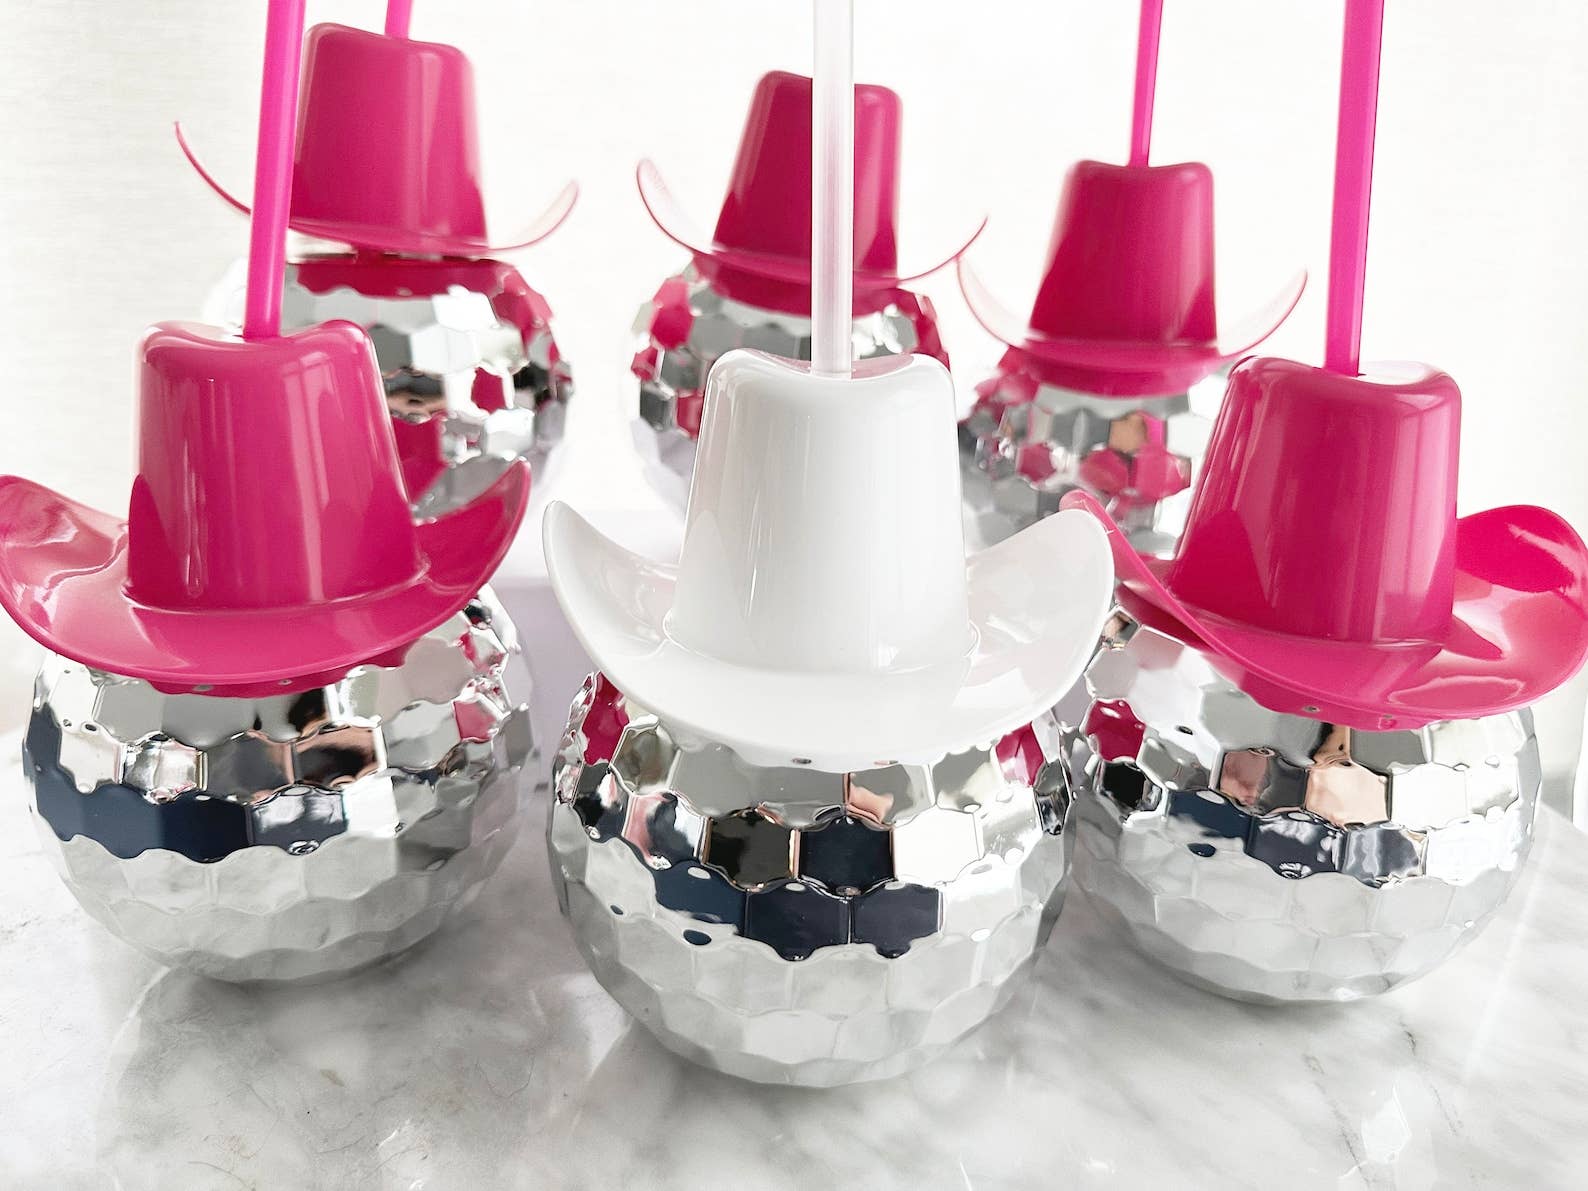 Disco Ball Cups with Cowboy Hat - Hot Pink